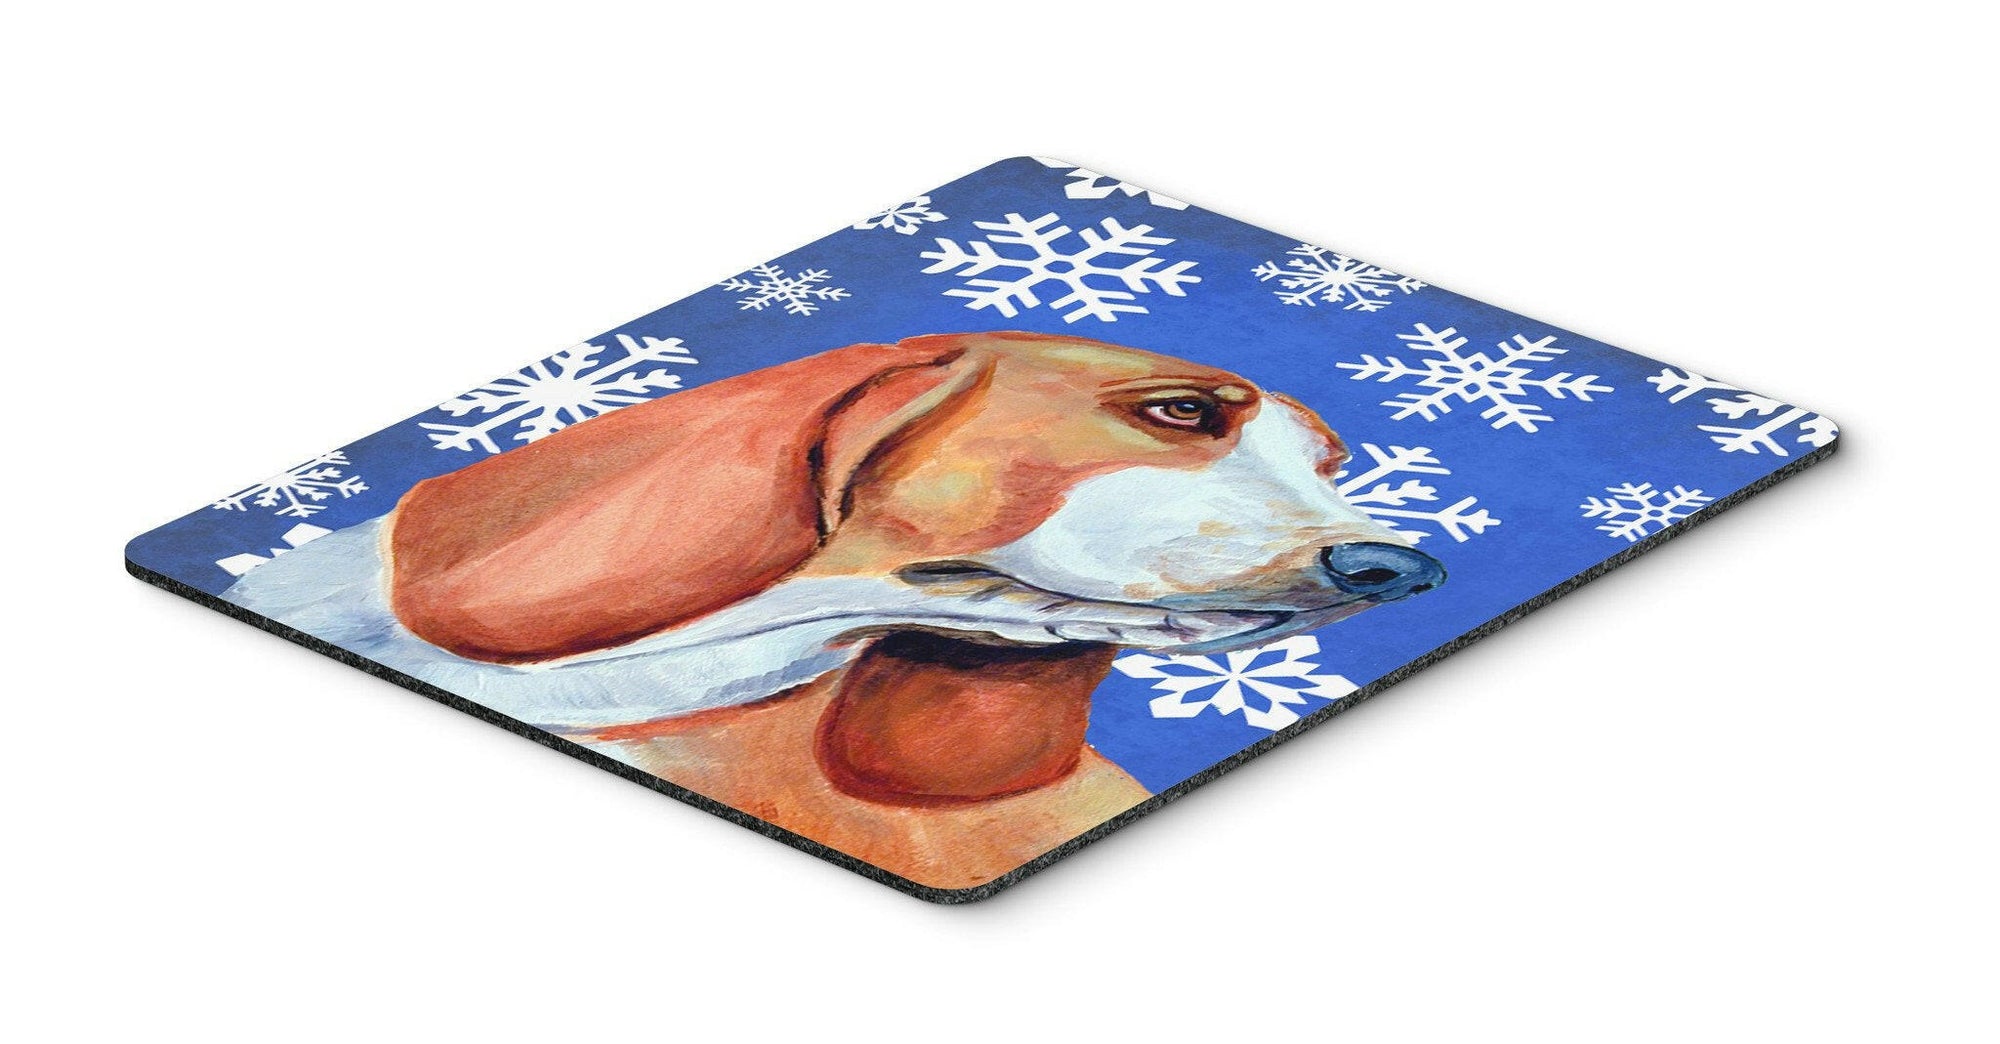 Basset Hound Winter Snowflakes Holiday Mouse Pad, Hot Pad or Trivet by Caroline's Treasures